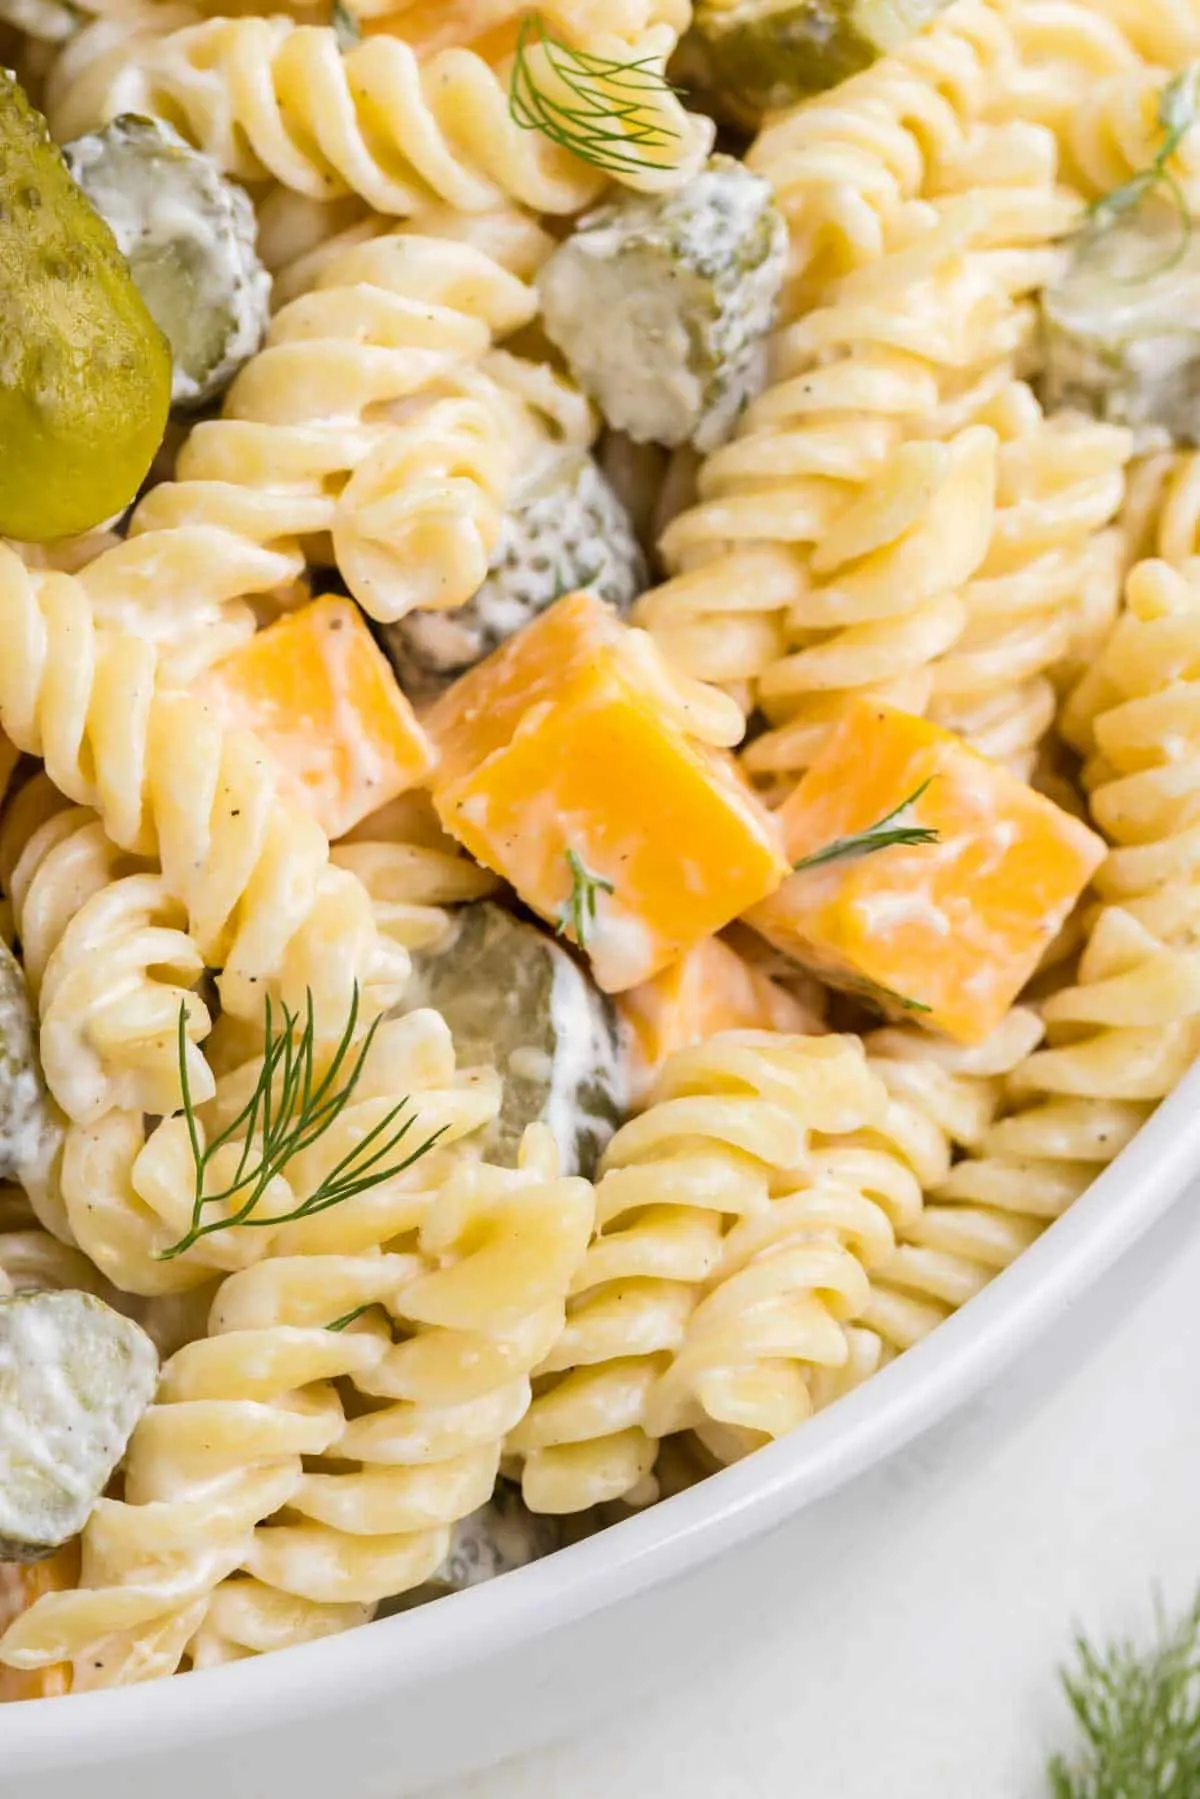 Dill Pickle Pasta Salad is a tasty cold side dish recipe made with rotini noodles and loaded with cheddar cheese, dill pickles and fresh dill all tossed in a mayo, sour cream and pickle juice dressing.